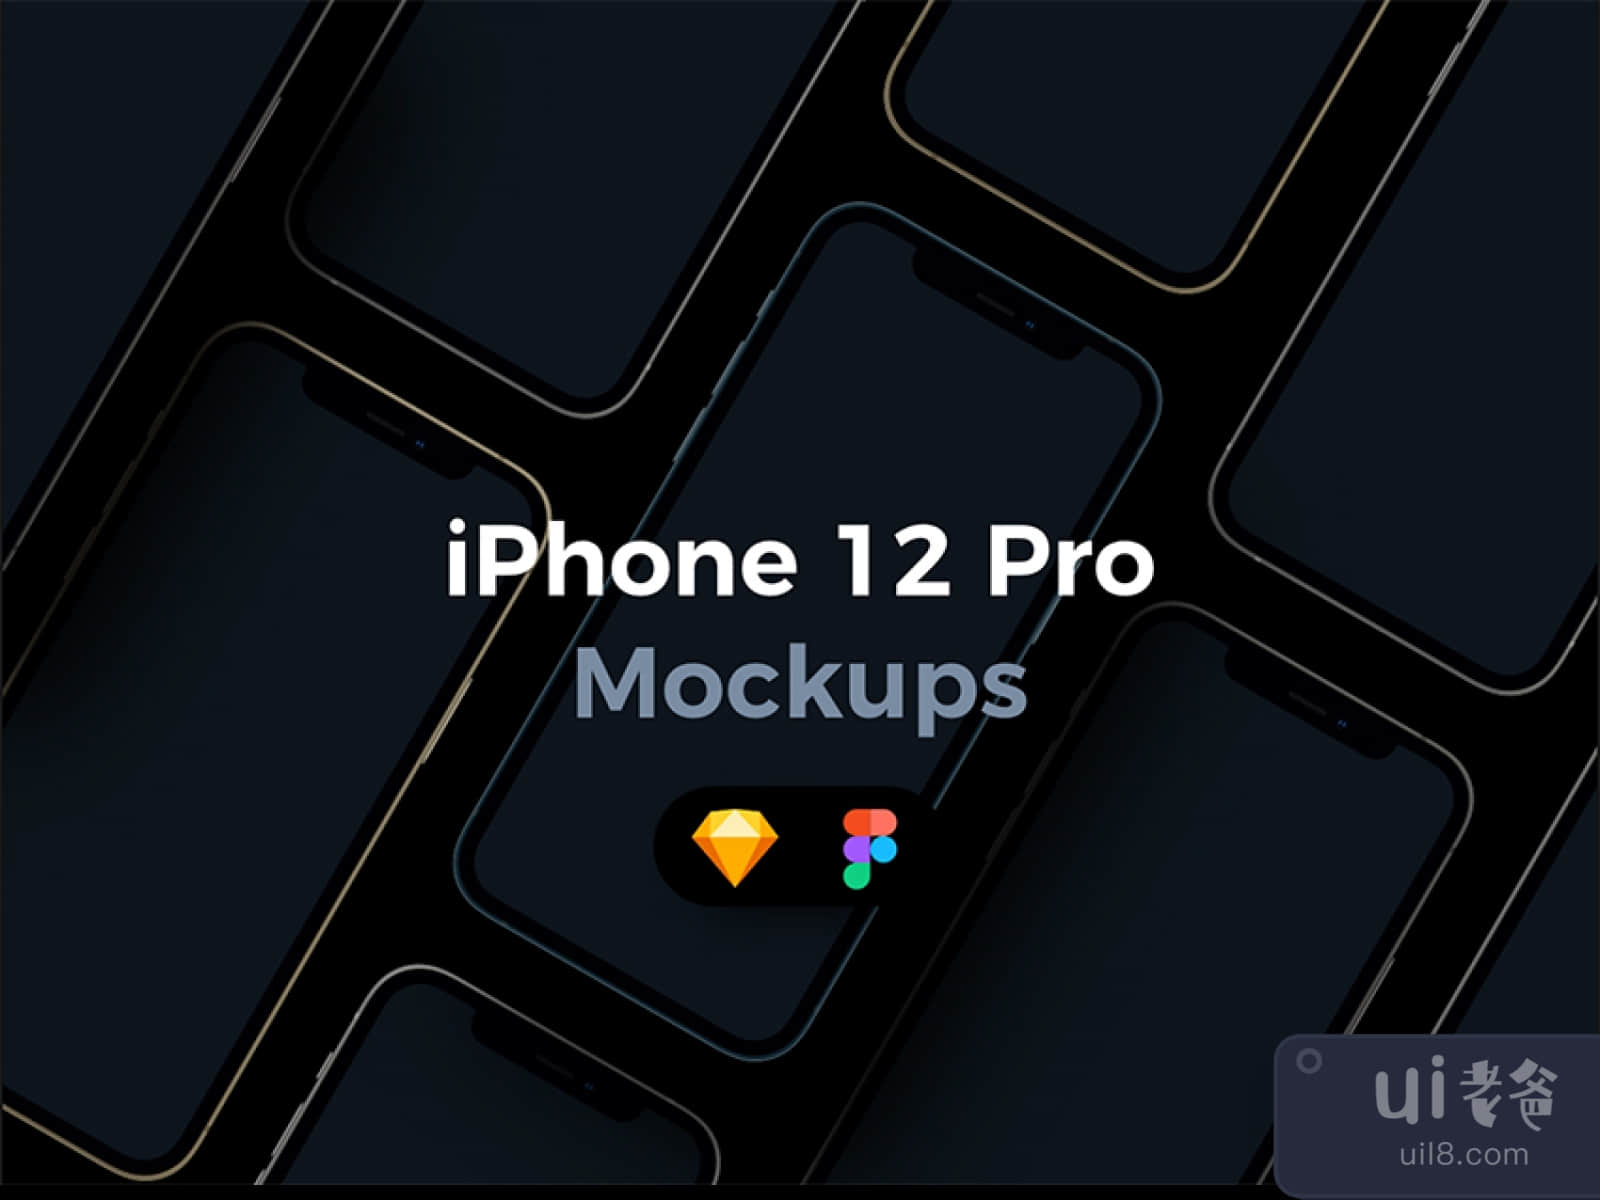 iPhone 12 Pro Mockup for Figma and Adobe XD No 1